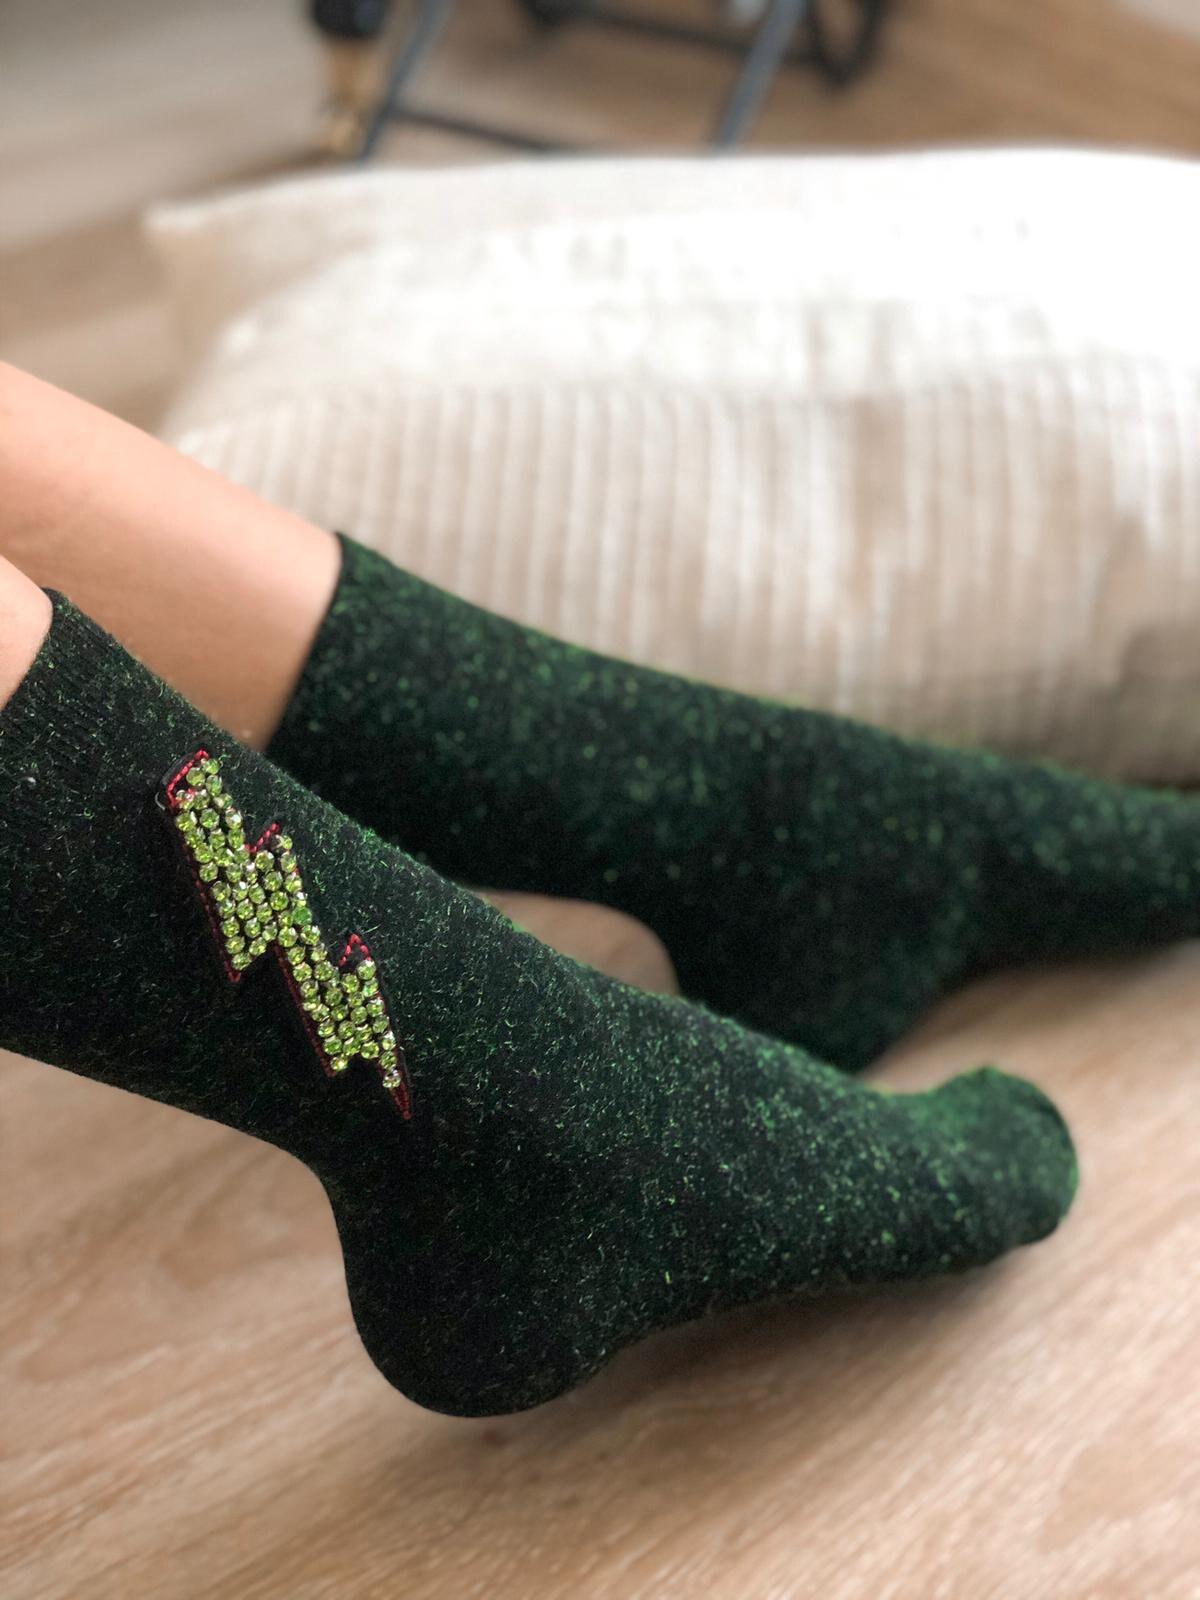 Trendy Electric Pattern Green Handmade Socks with Sparkling Light Green Crystals, Green Color Embellished Sockets - Trendy and Cute! available at Moyoni Design